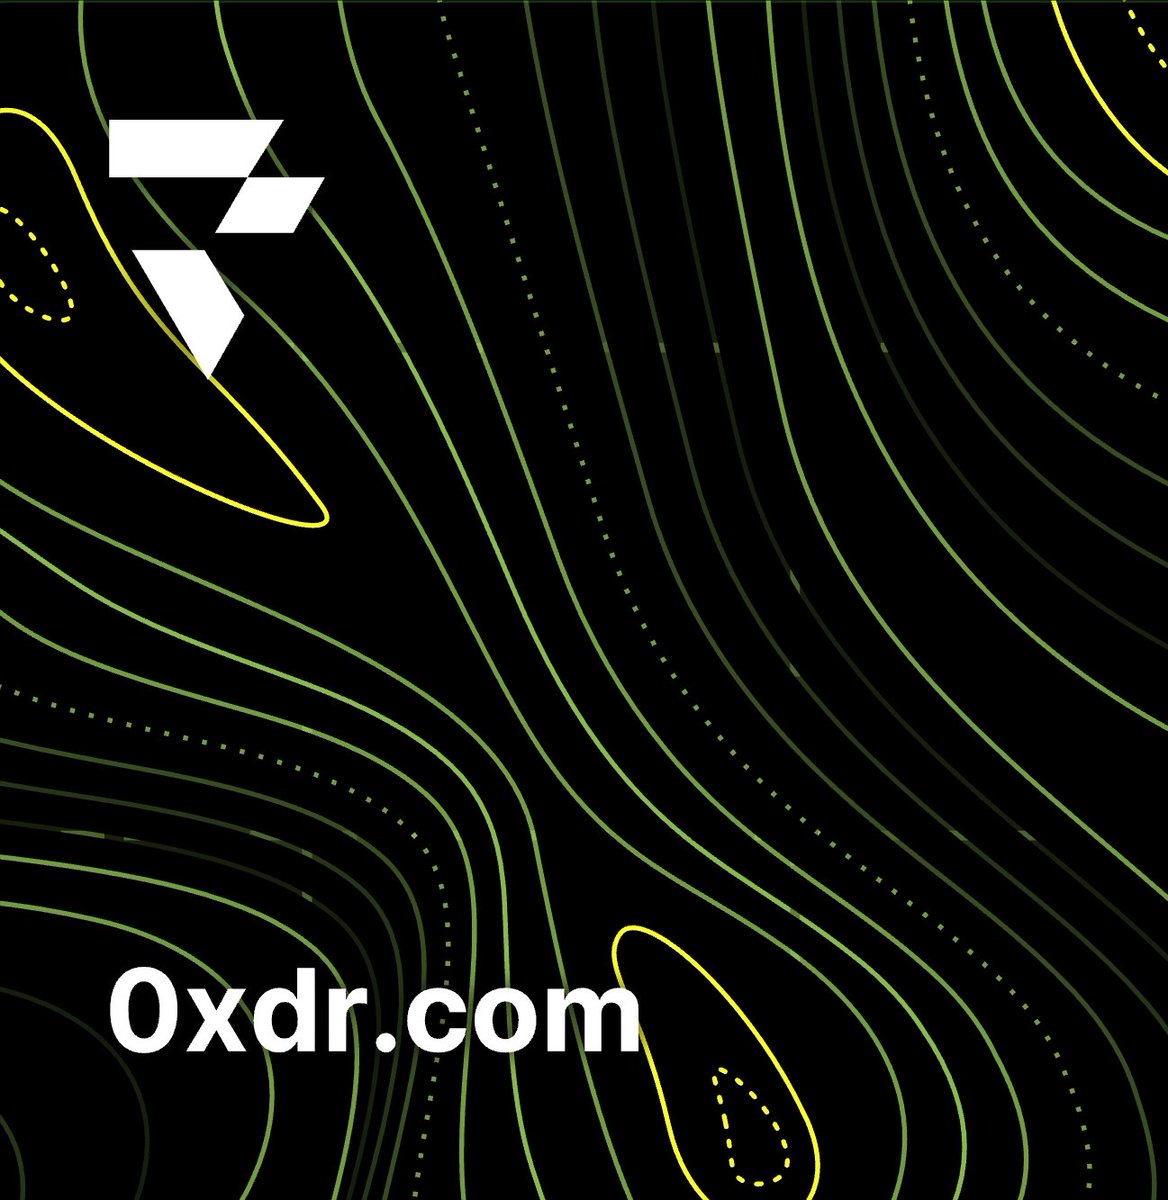 Listed tokenized domain 0xdr.com on OpenSea! For only 0.20 eth! 🔥 opensea.io/assets/optimis…
#domains #domainsales #tokenized